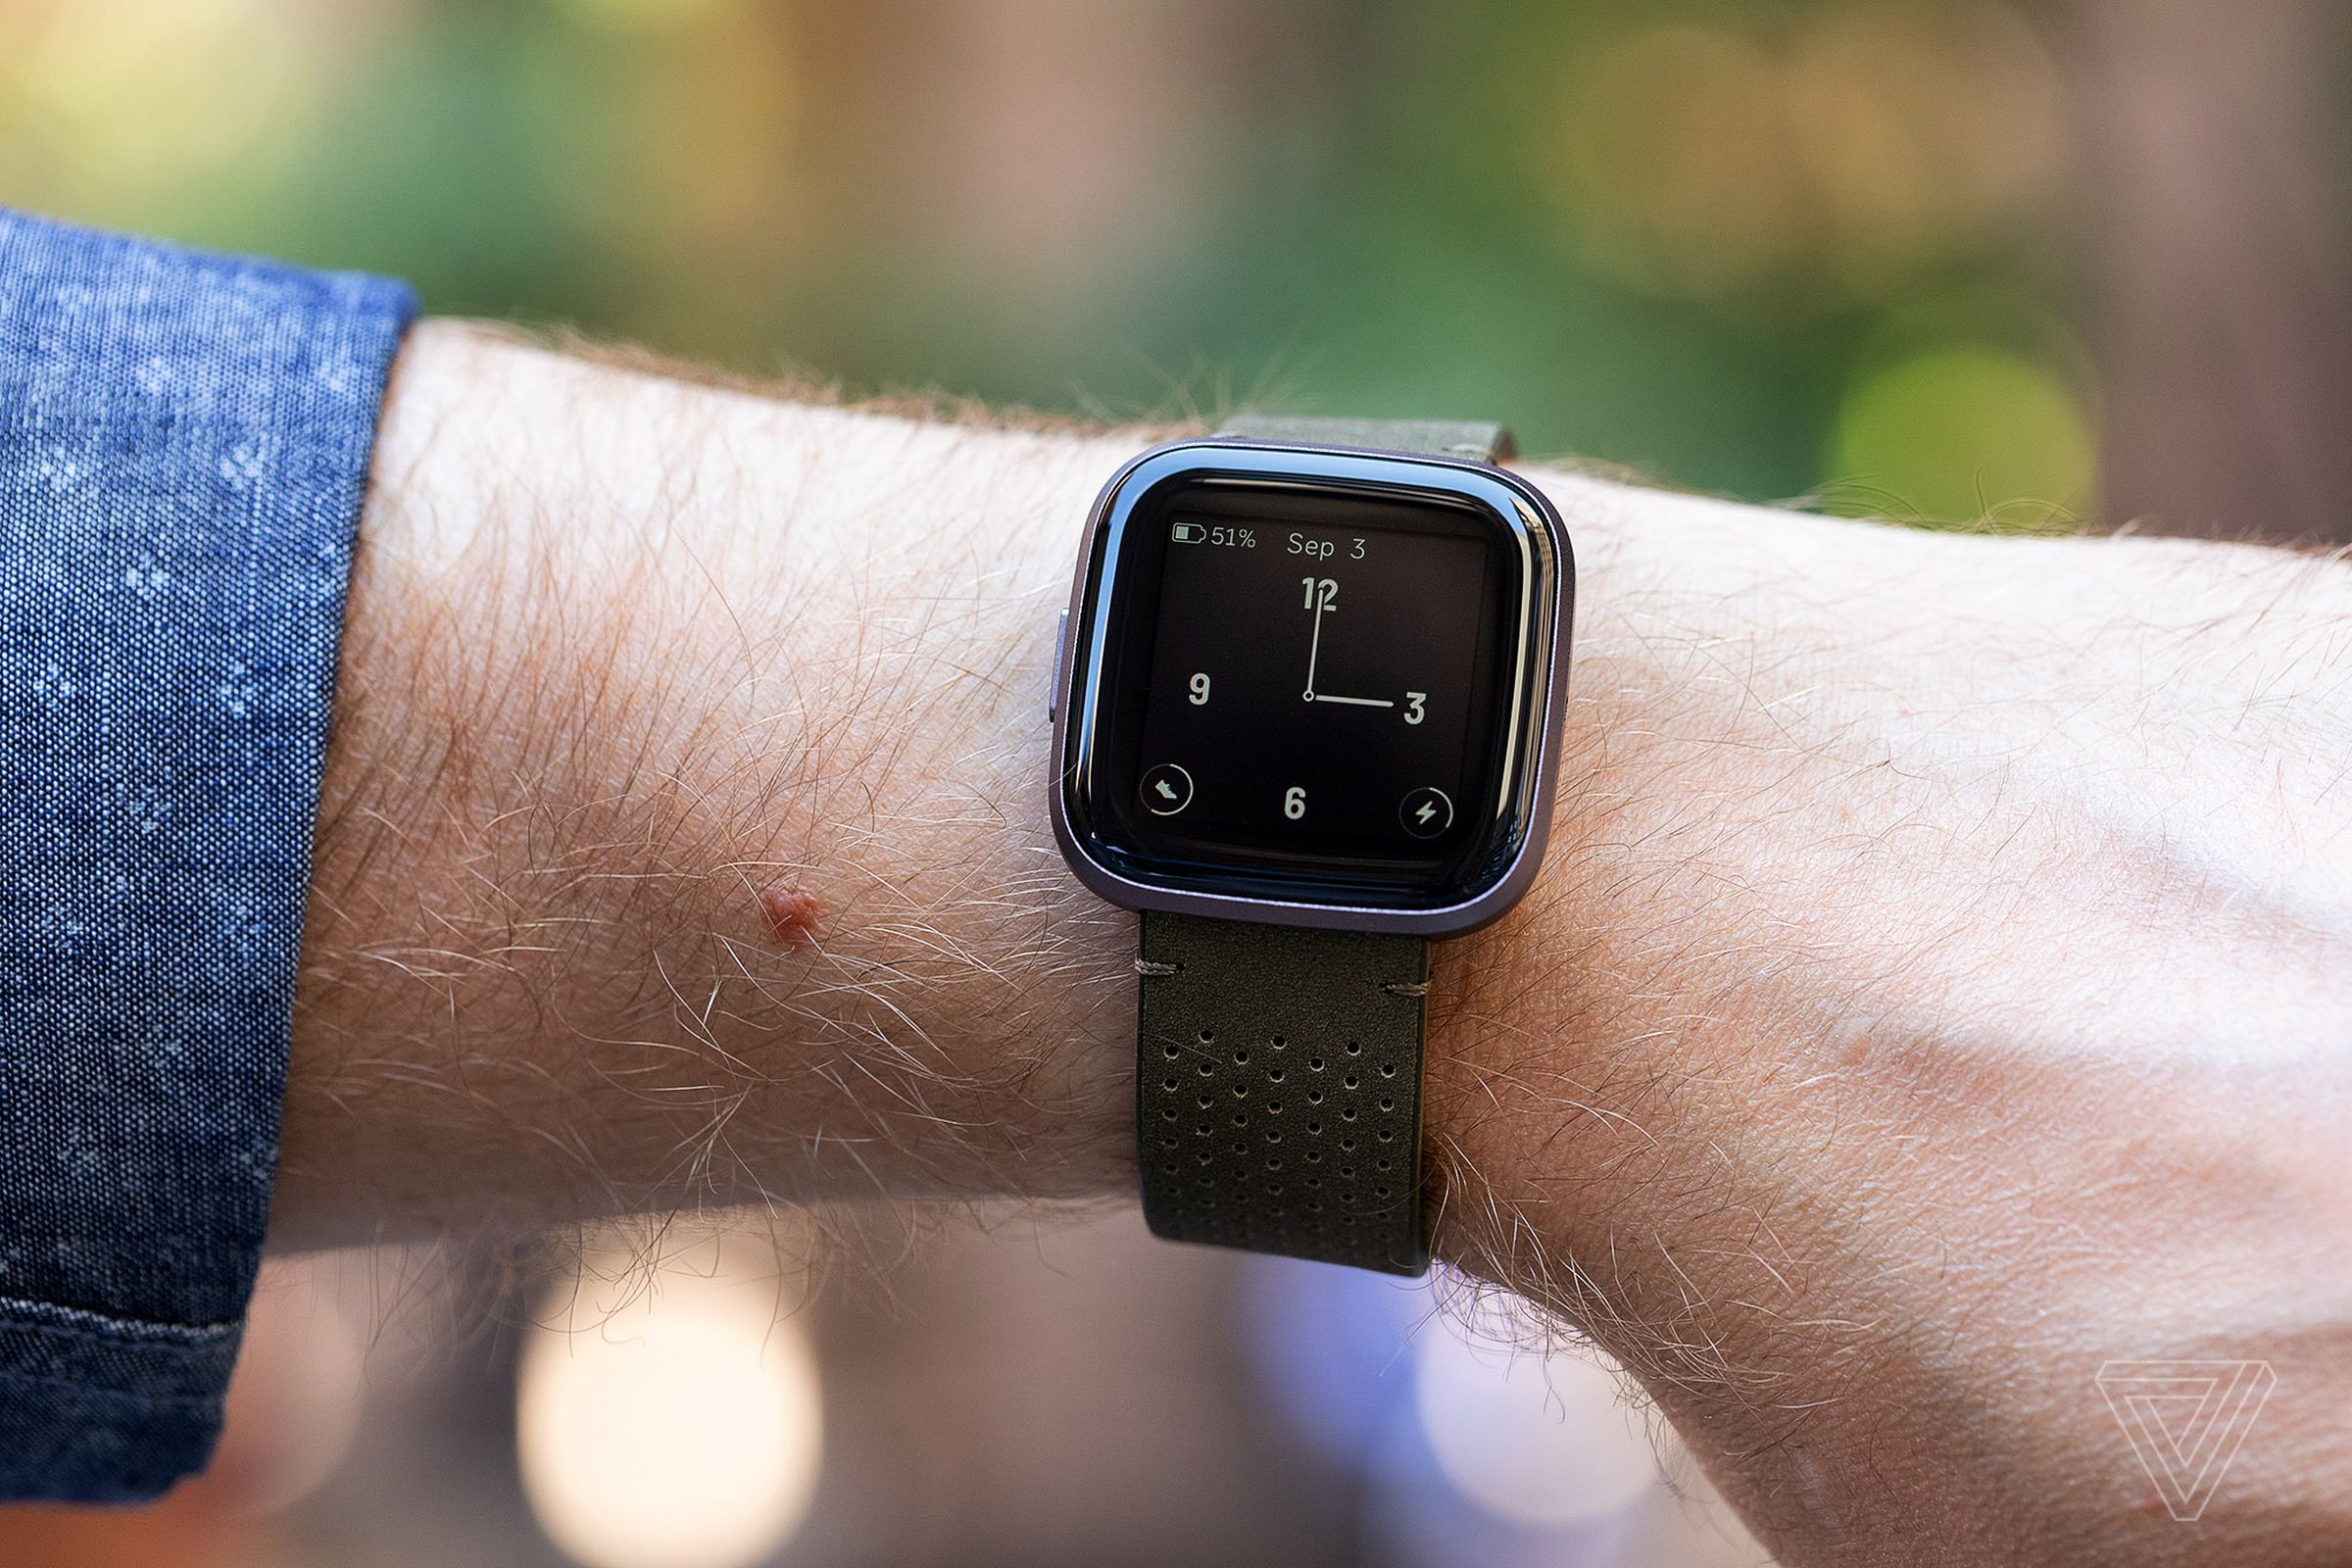 The new always-on display lets you see the time and your current workout, but not much more